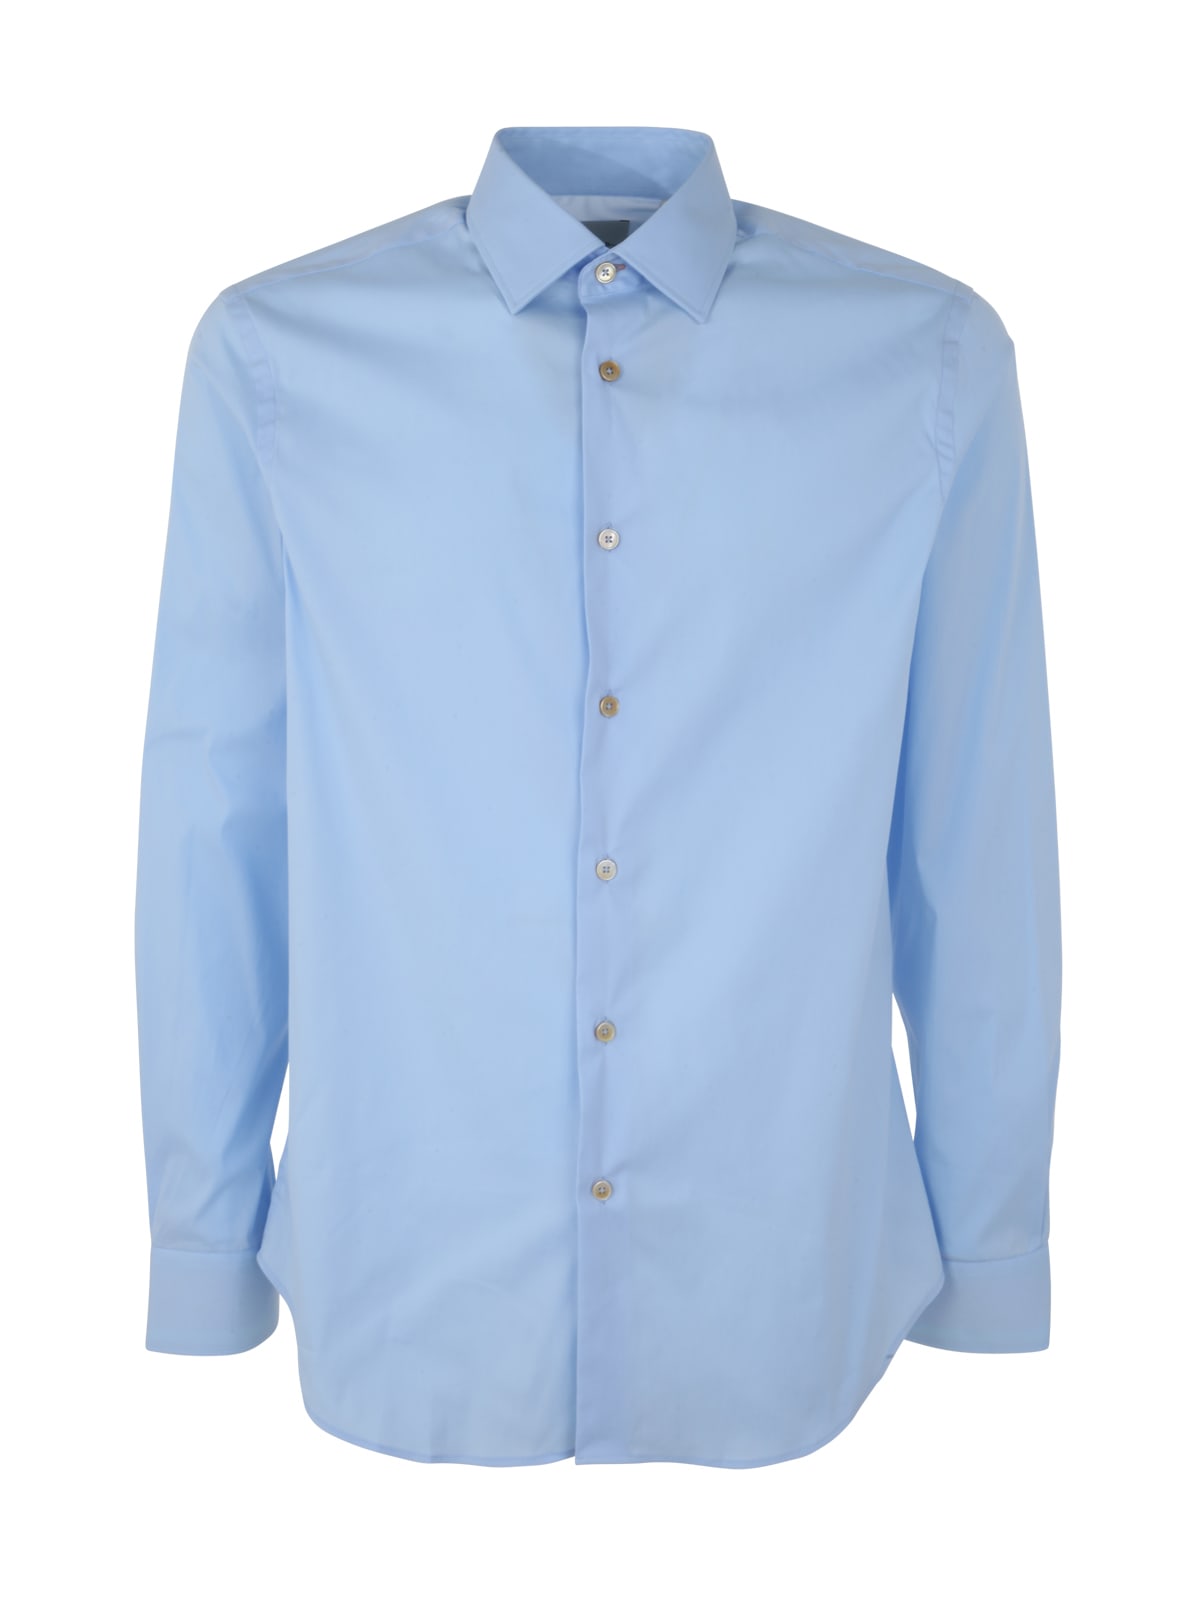 PAUL SMITH MENS TAILORED FIT SHIRT